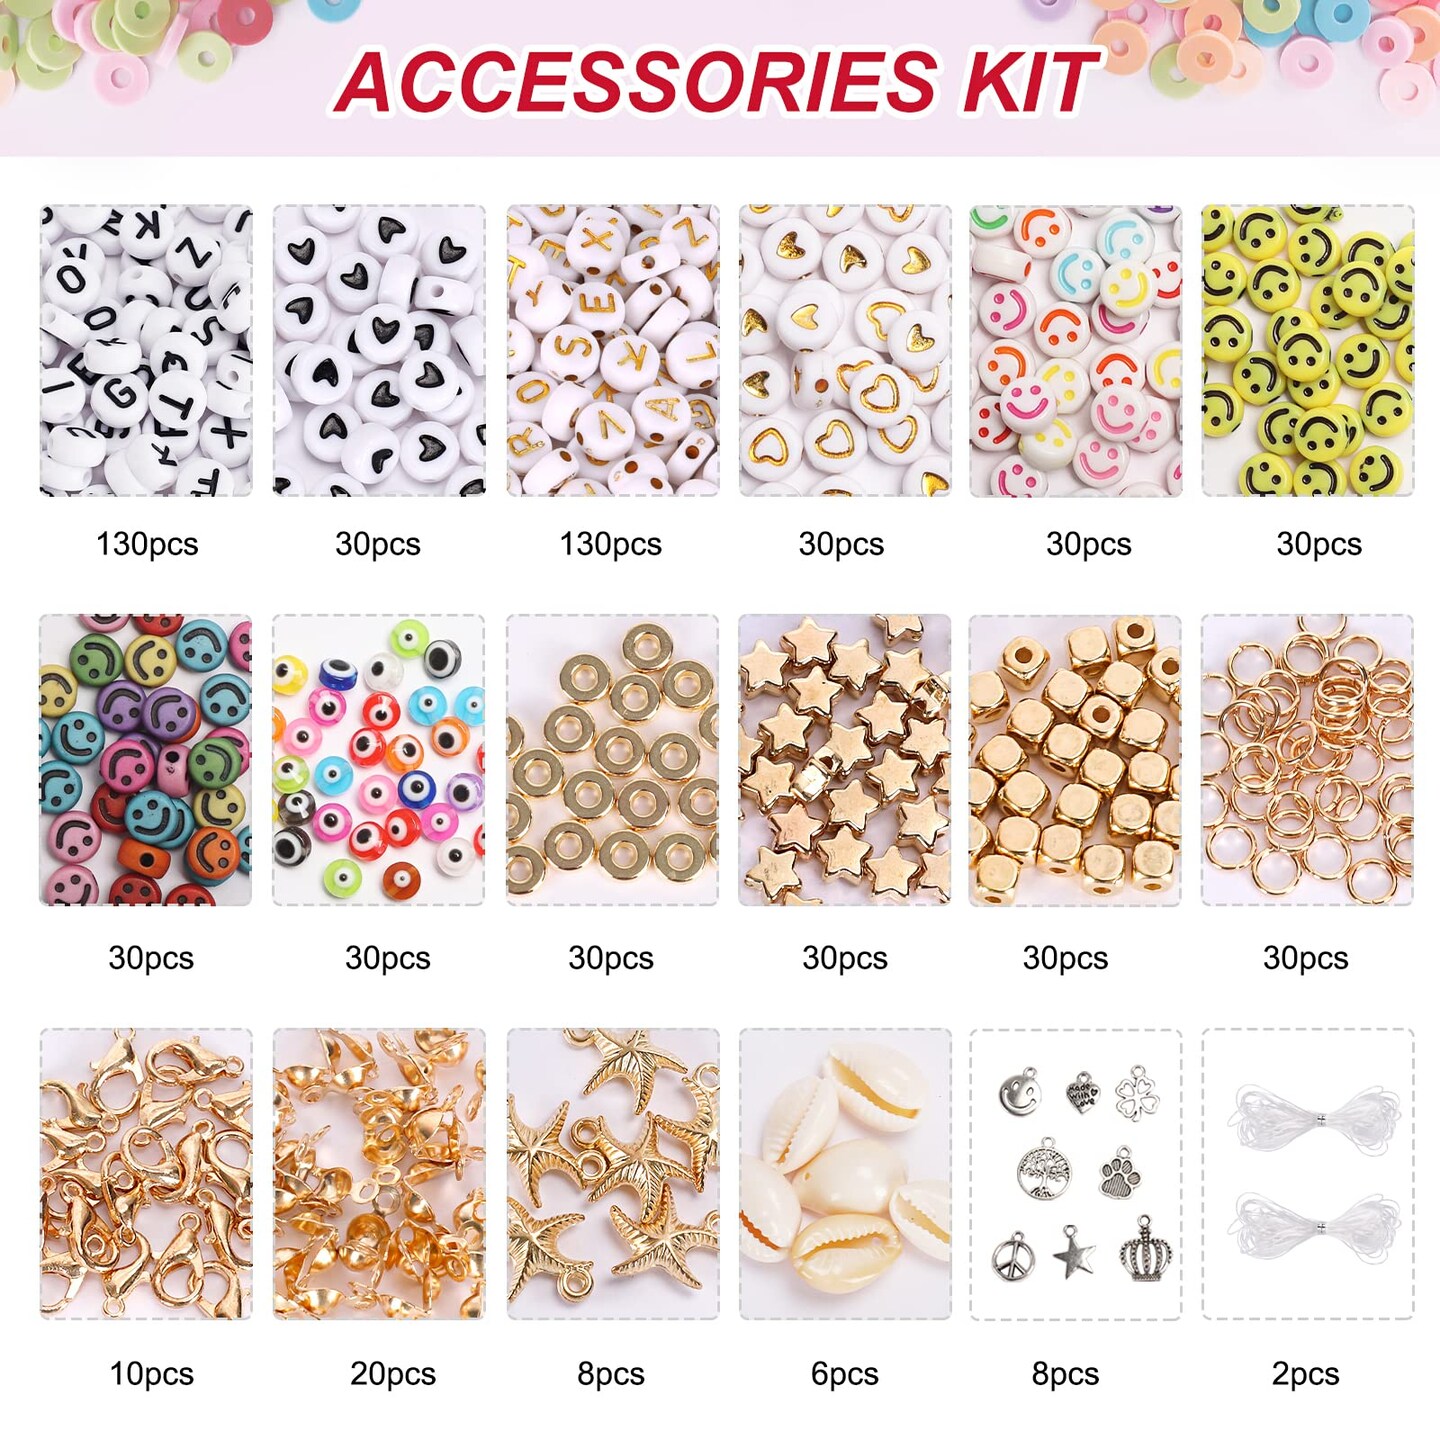 Hapgo 13000pcs Clay Beads Bracelet Making Kit, 48 Colors Friendship Bracelet Kit Flat Polymer Heishi Beads & Glass Seed Beads with Charms for